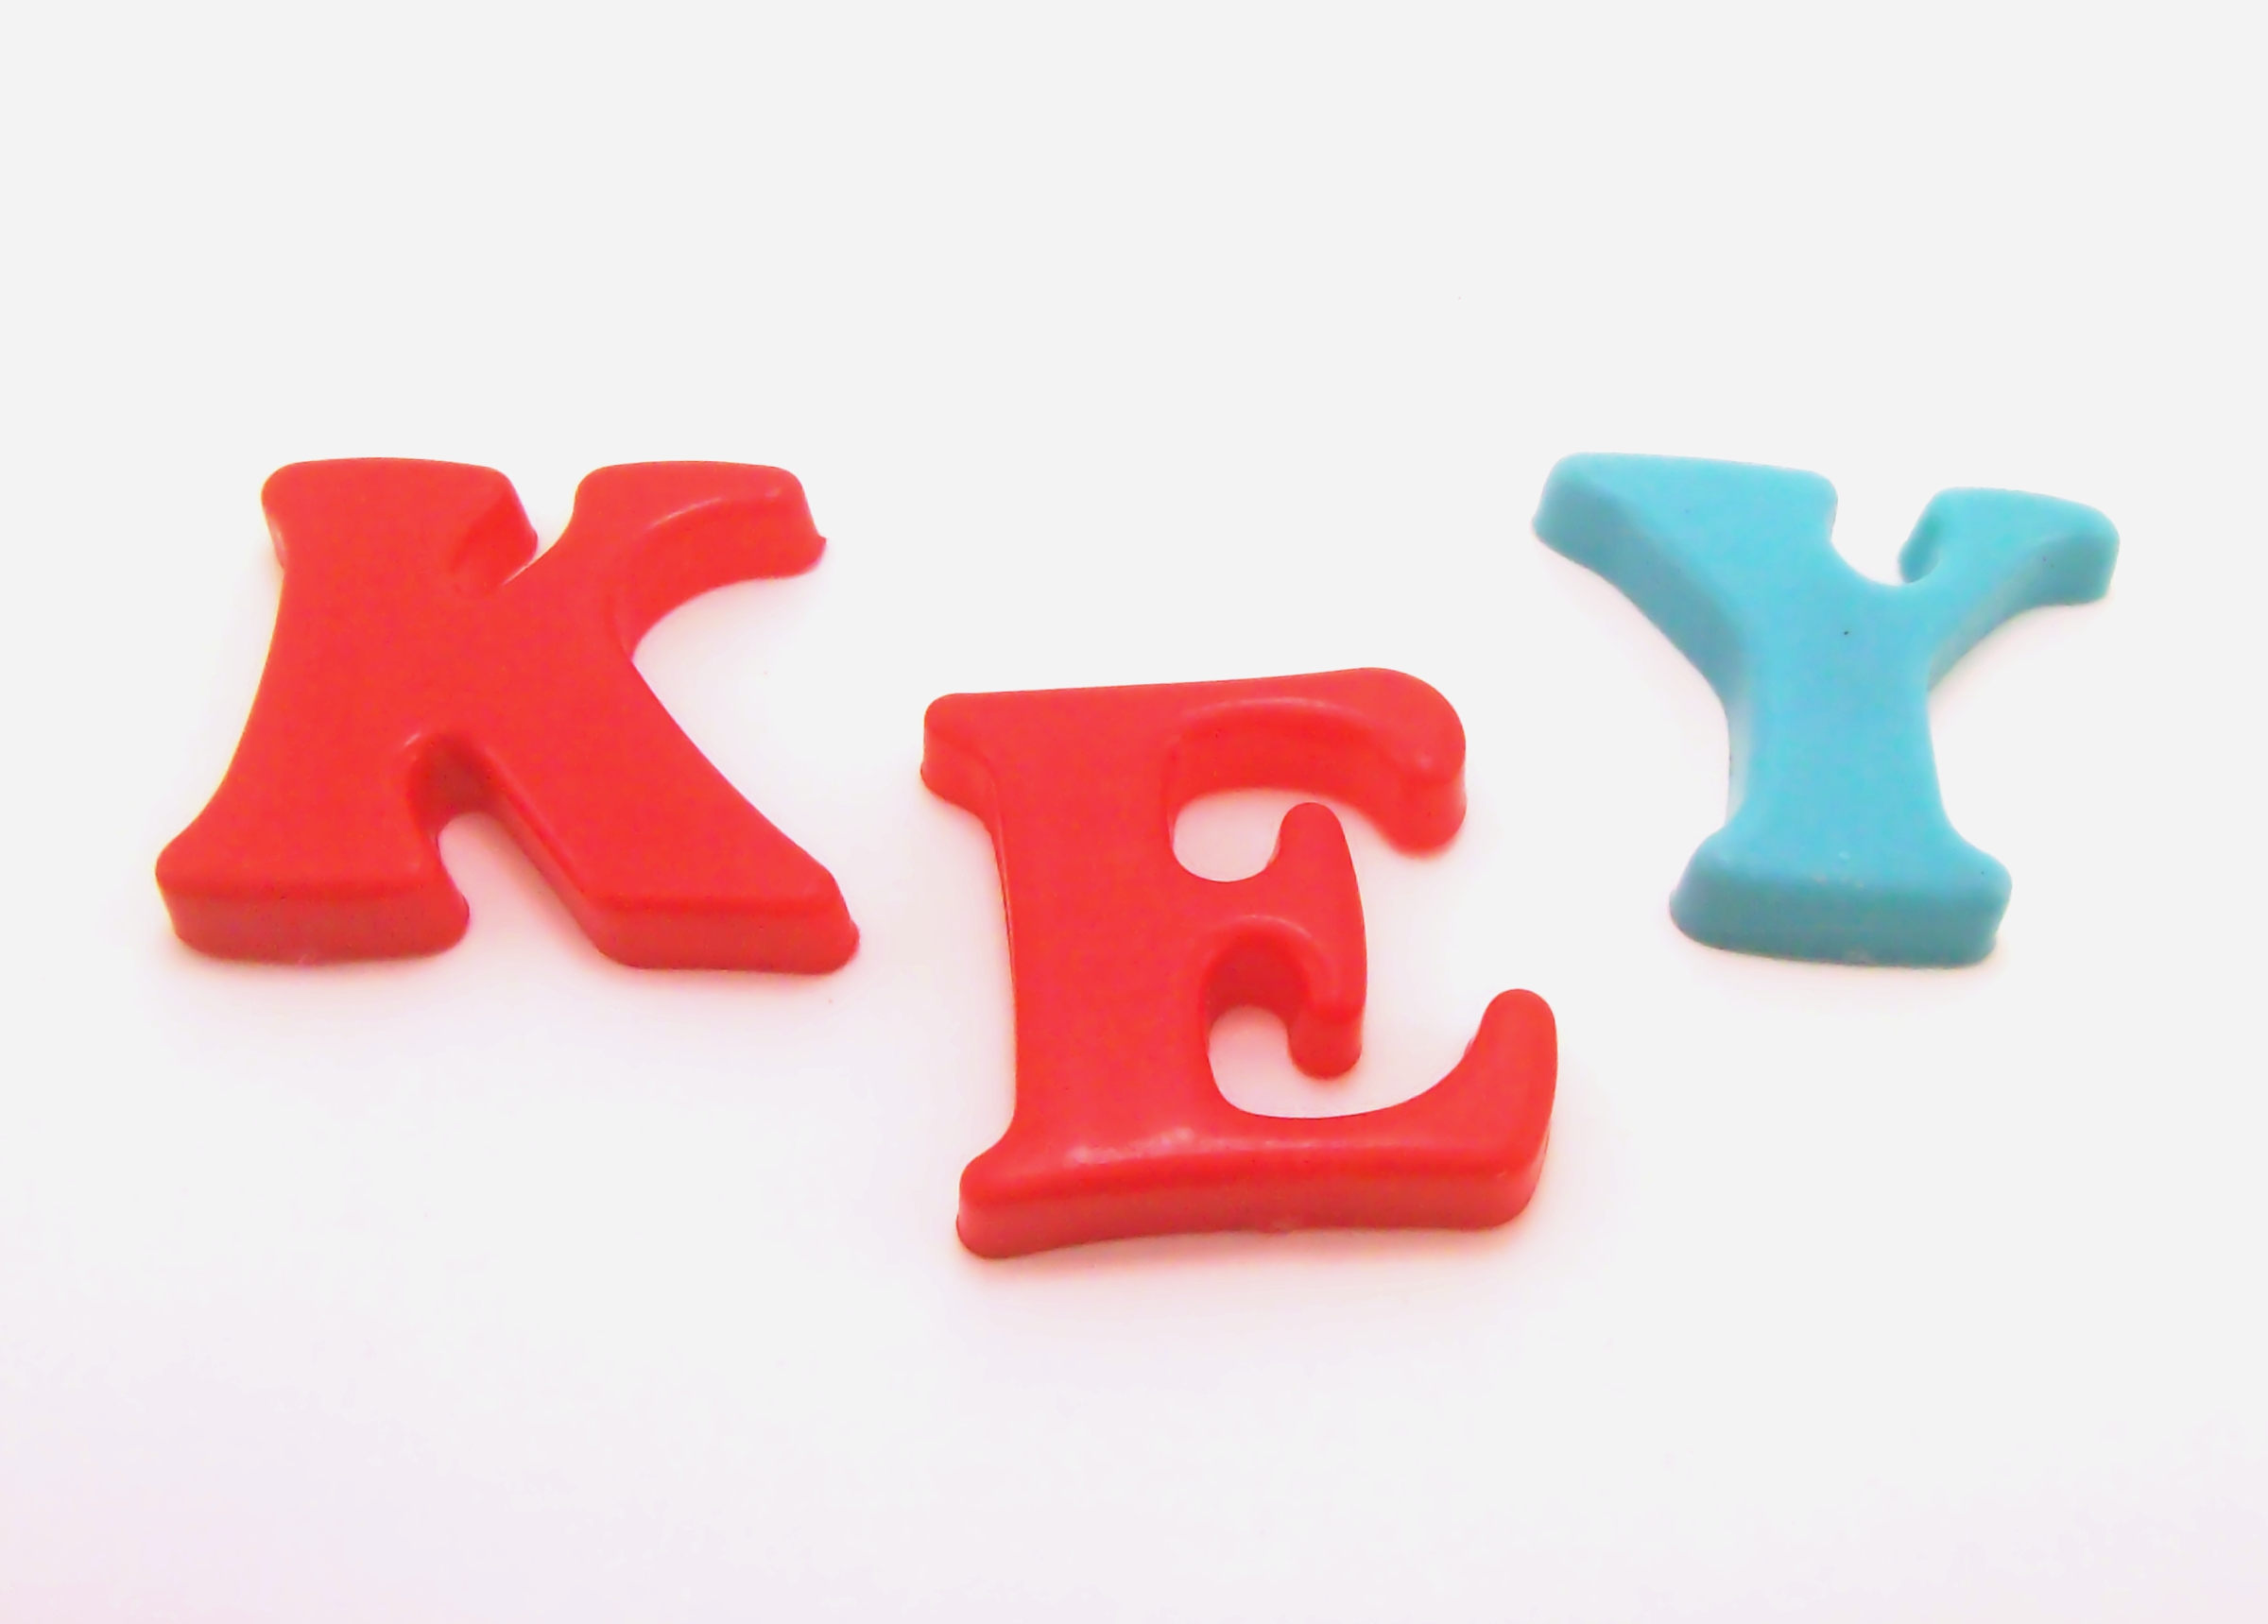 Plastic letters - Key, Colorful, Fun, Isolated, Key, HQ Photo